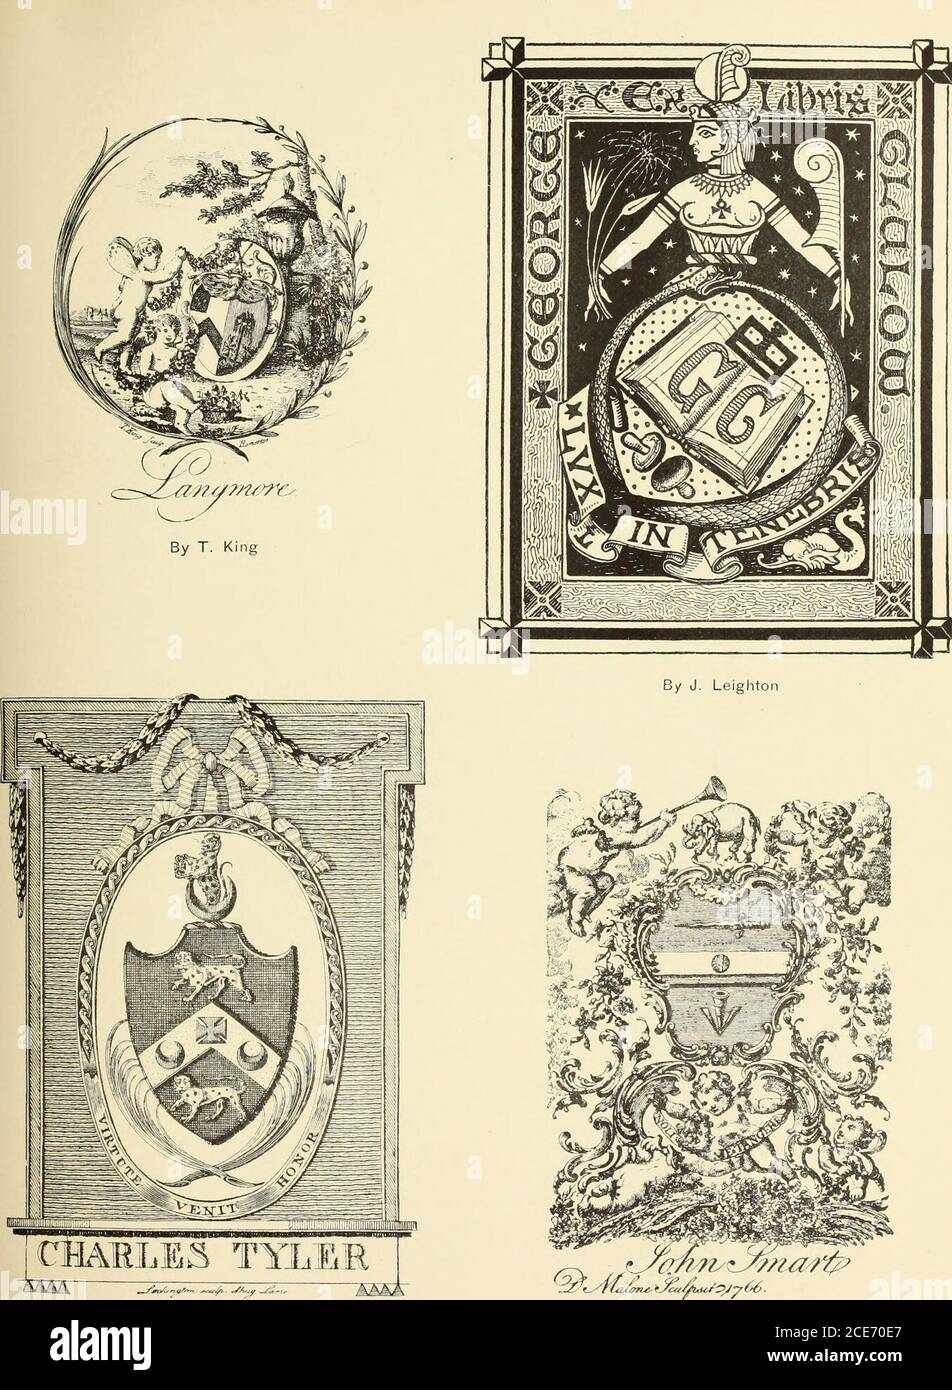 . Artists and engravers of British and American book plates : a book of reference for book plate and print collectors . V., 125Ed. Sydney Williams Signature Style Date - I. A. Latham. 7 Featherstone Buildings,Holborn J. L. Pictorial 1893 Lauder sc. Leith Armorial 1840 T. D. L. inv. C. W. S(herborn) sc.T. N. D. L. T. D. L. in. C. W. S(herborn) sc. Armorial Monogram Pictorial 188018901890 1 .pnHipi*VtnrO T^pI pt Y*i c 1 MonogramArmorialCrestSeal Monogram Armorial Armorial 1855l868l8S4 I85OI85O1856I89S1867. By Lockington By D. Malone ( 57 ) Lewis (F.) Artist and Book Plate Le Keux (John Henry). Stock Photo